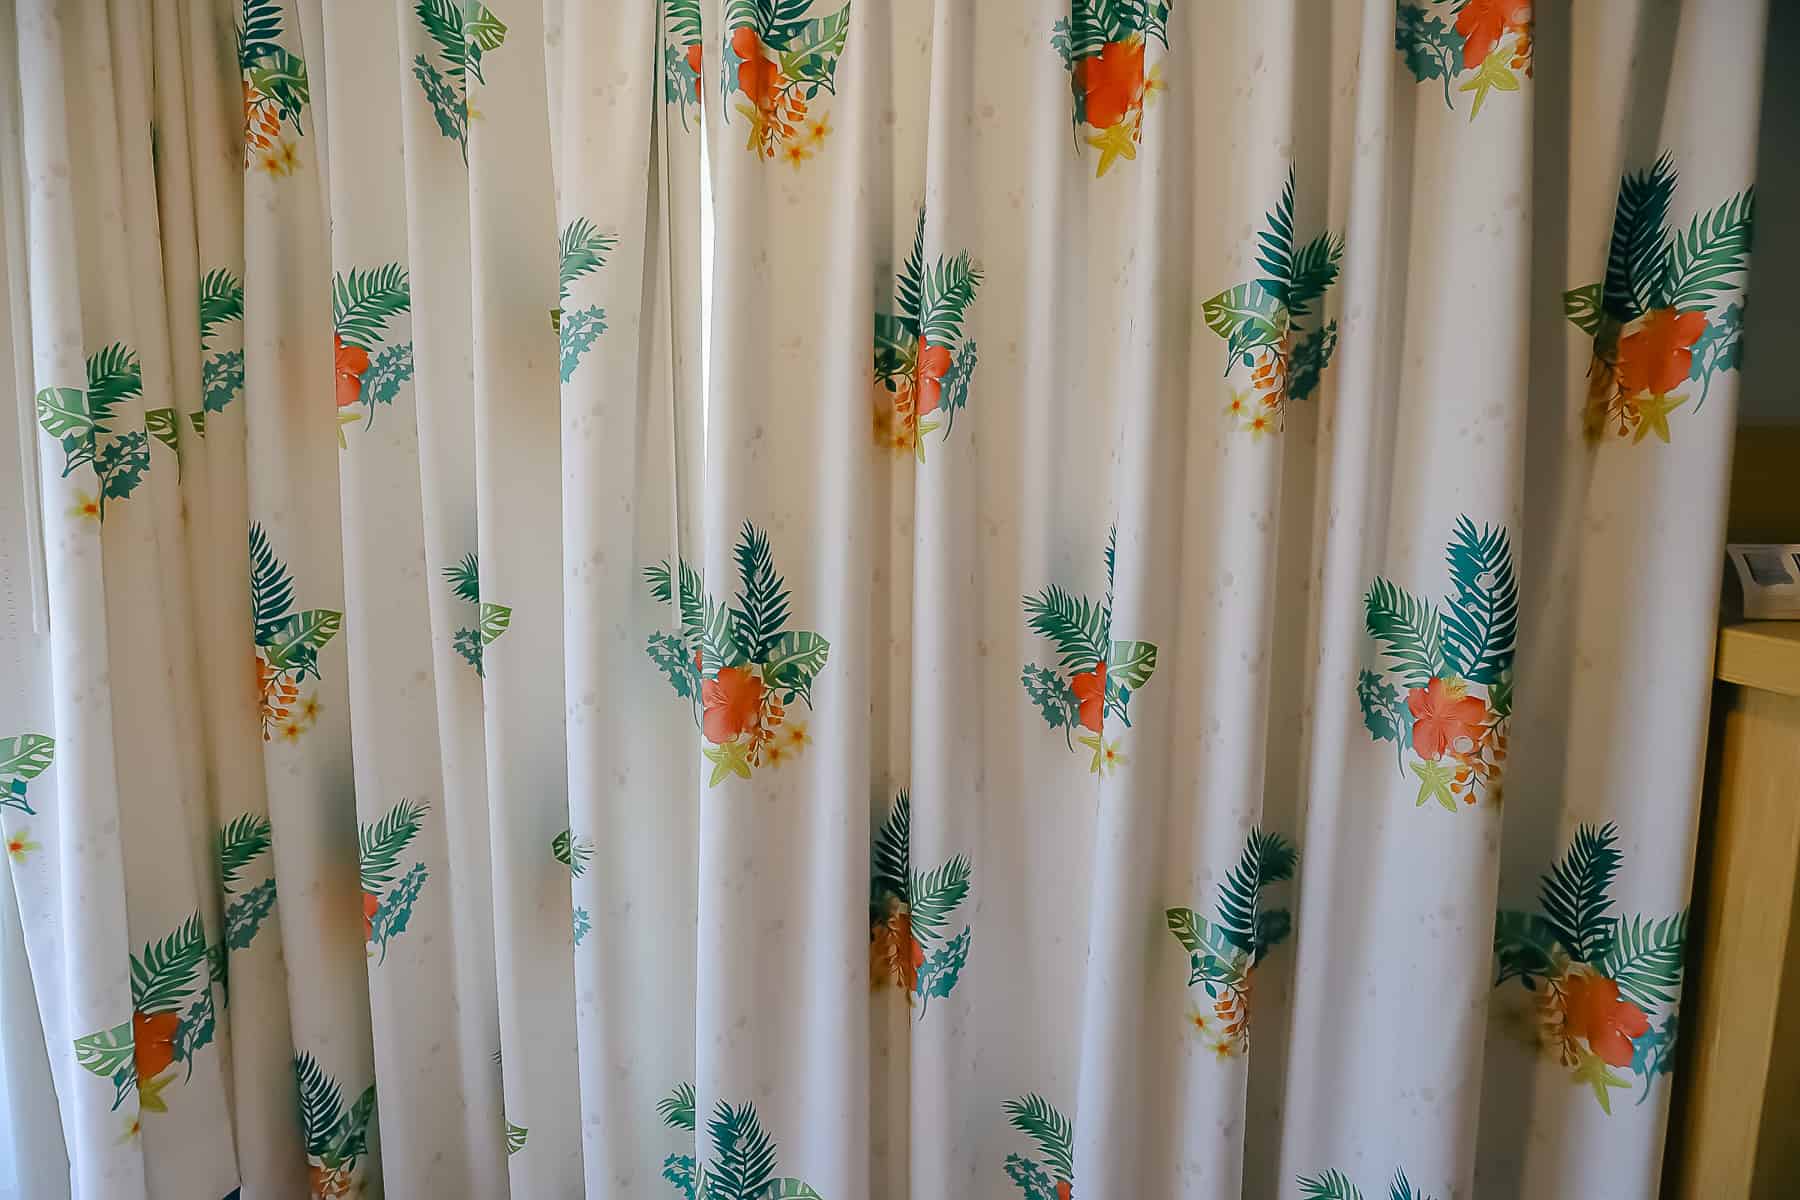 New curtains in the rooms at Caribbean Beach have hidden Mickey's. 